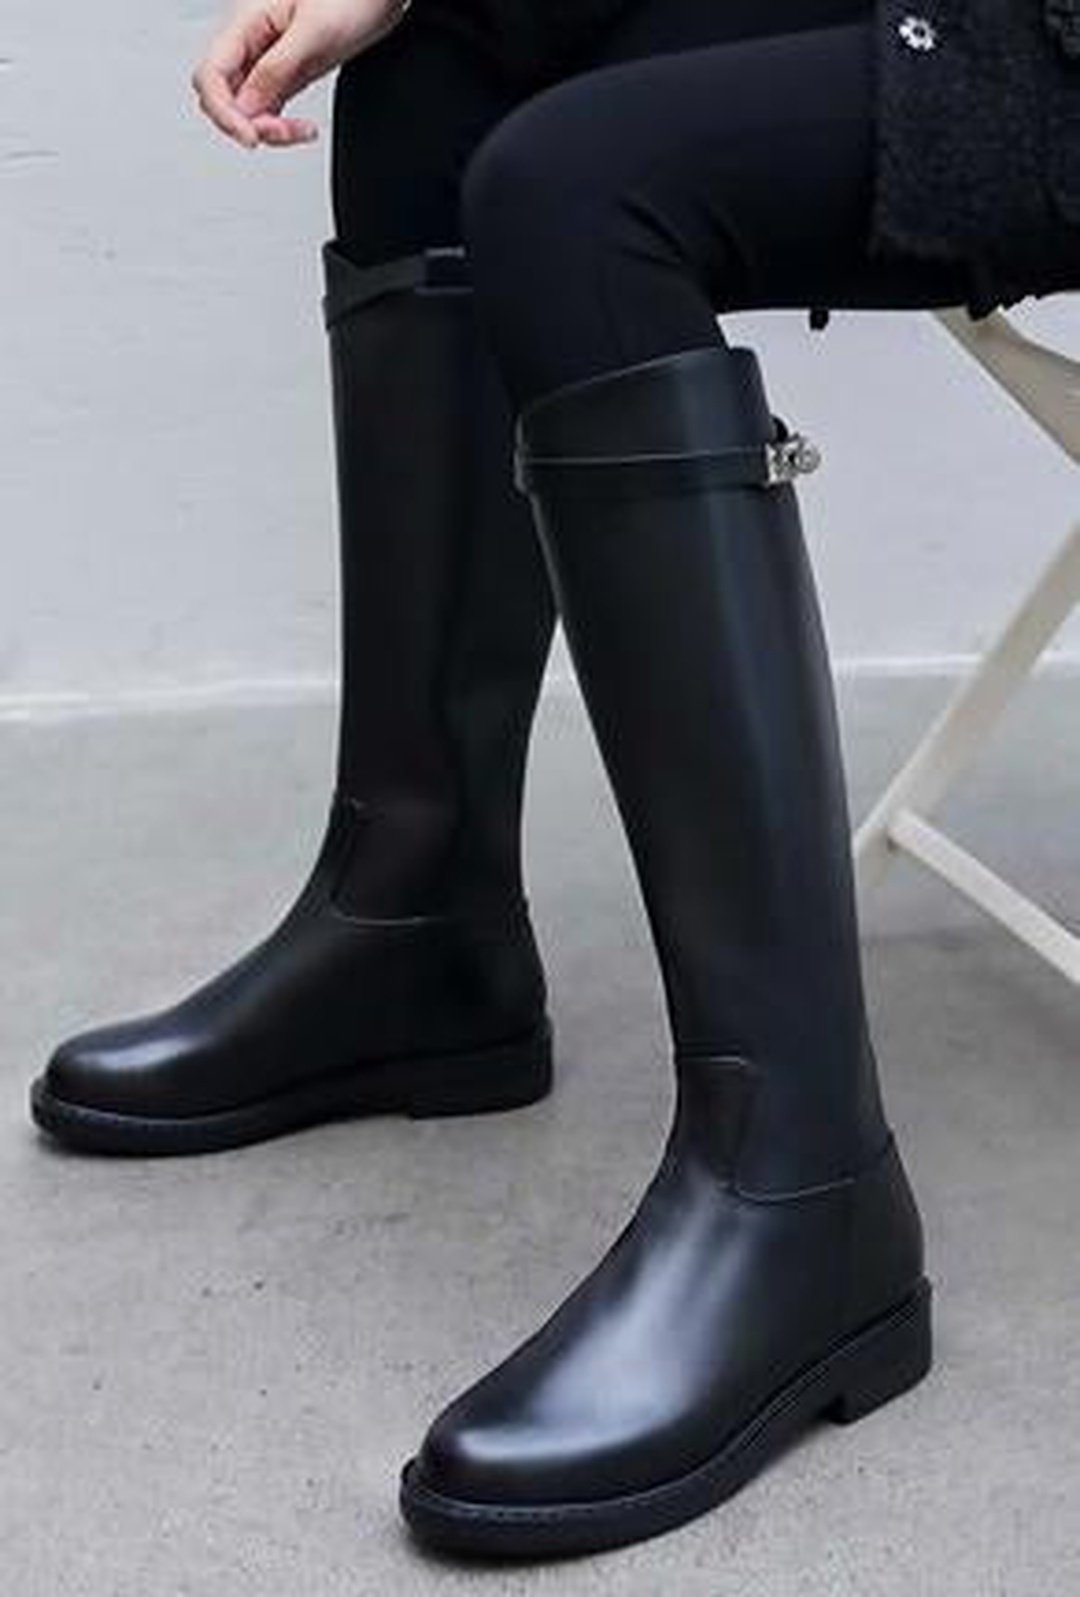 NETTY - RIDDING STYLE BOOTS